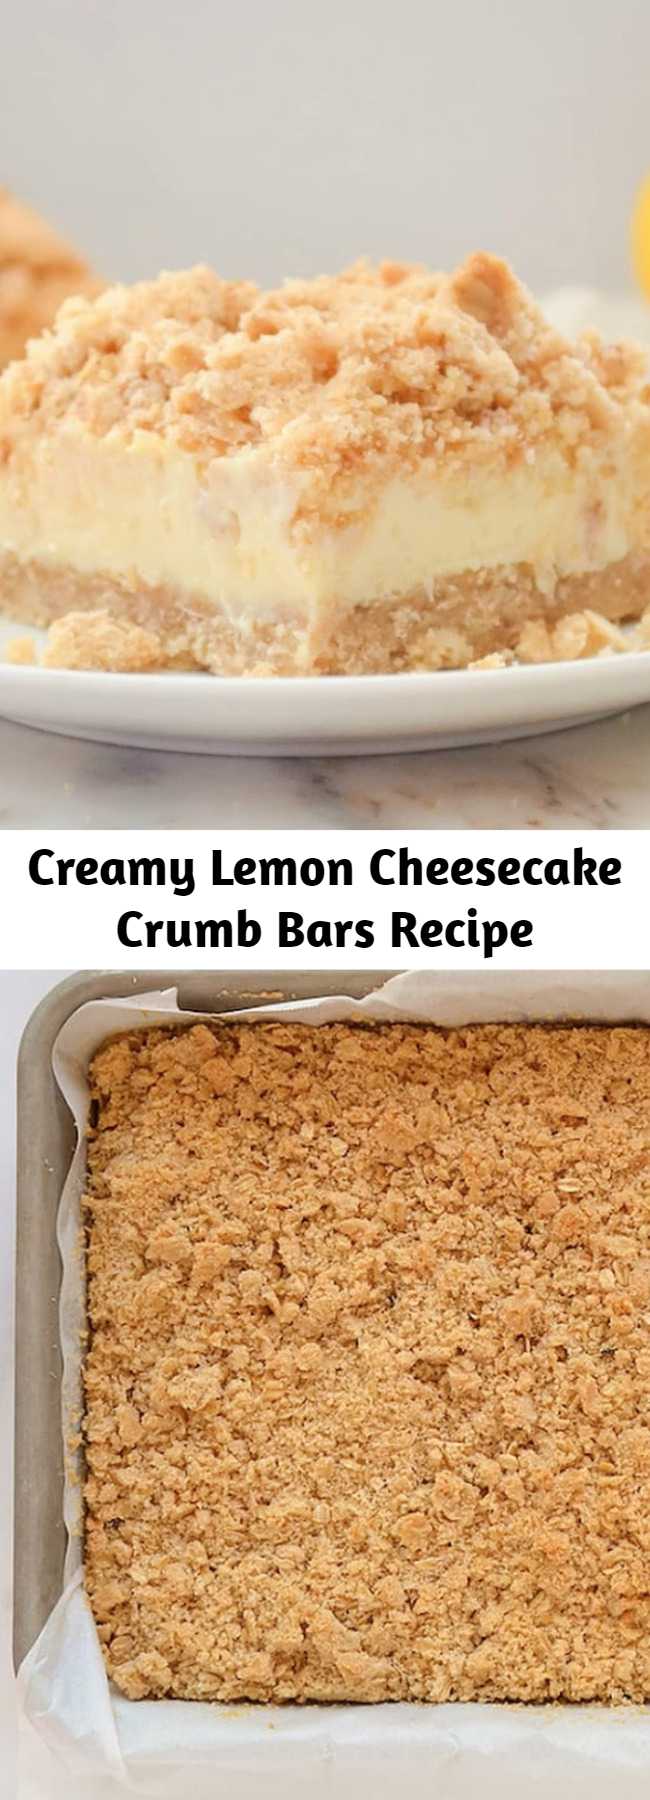 Creamy Lemon Cheesecake Crumb Bars Recipe - Lemon Cheesecake Crumb Bars are a delicious creamy Lemon Cheesecake Bar made with sweetened condensed milk with a delicious oat crumb top and bottom crust. They are delicious kept in the freezer for a refreshing summer dessert.